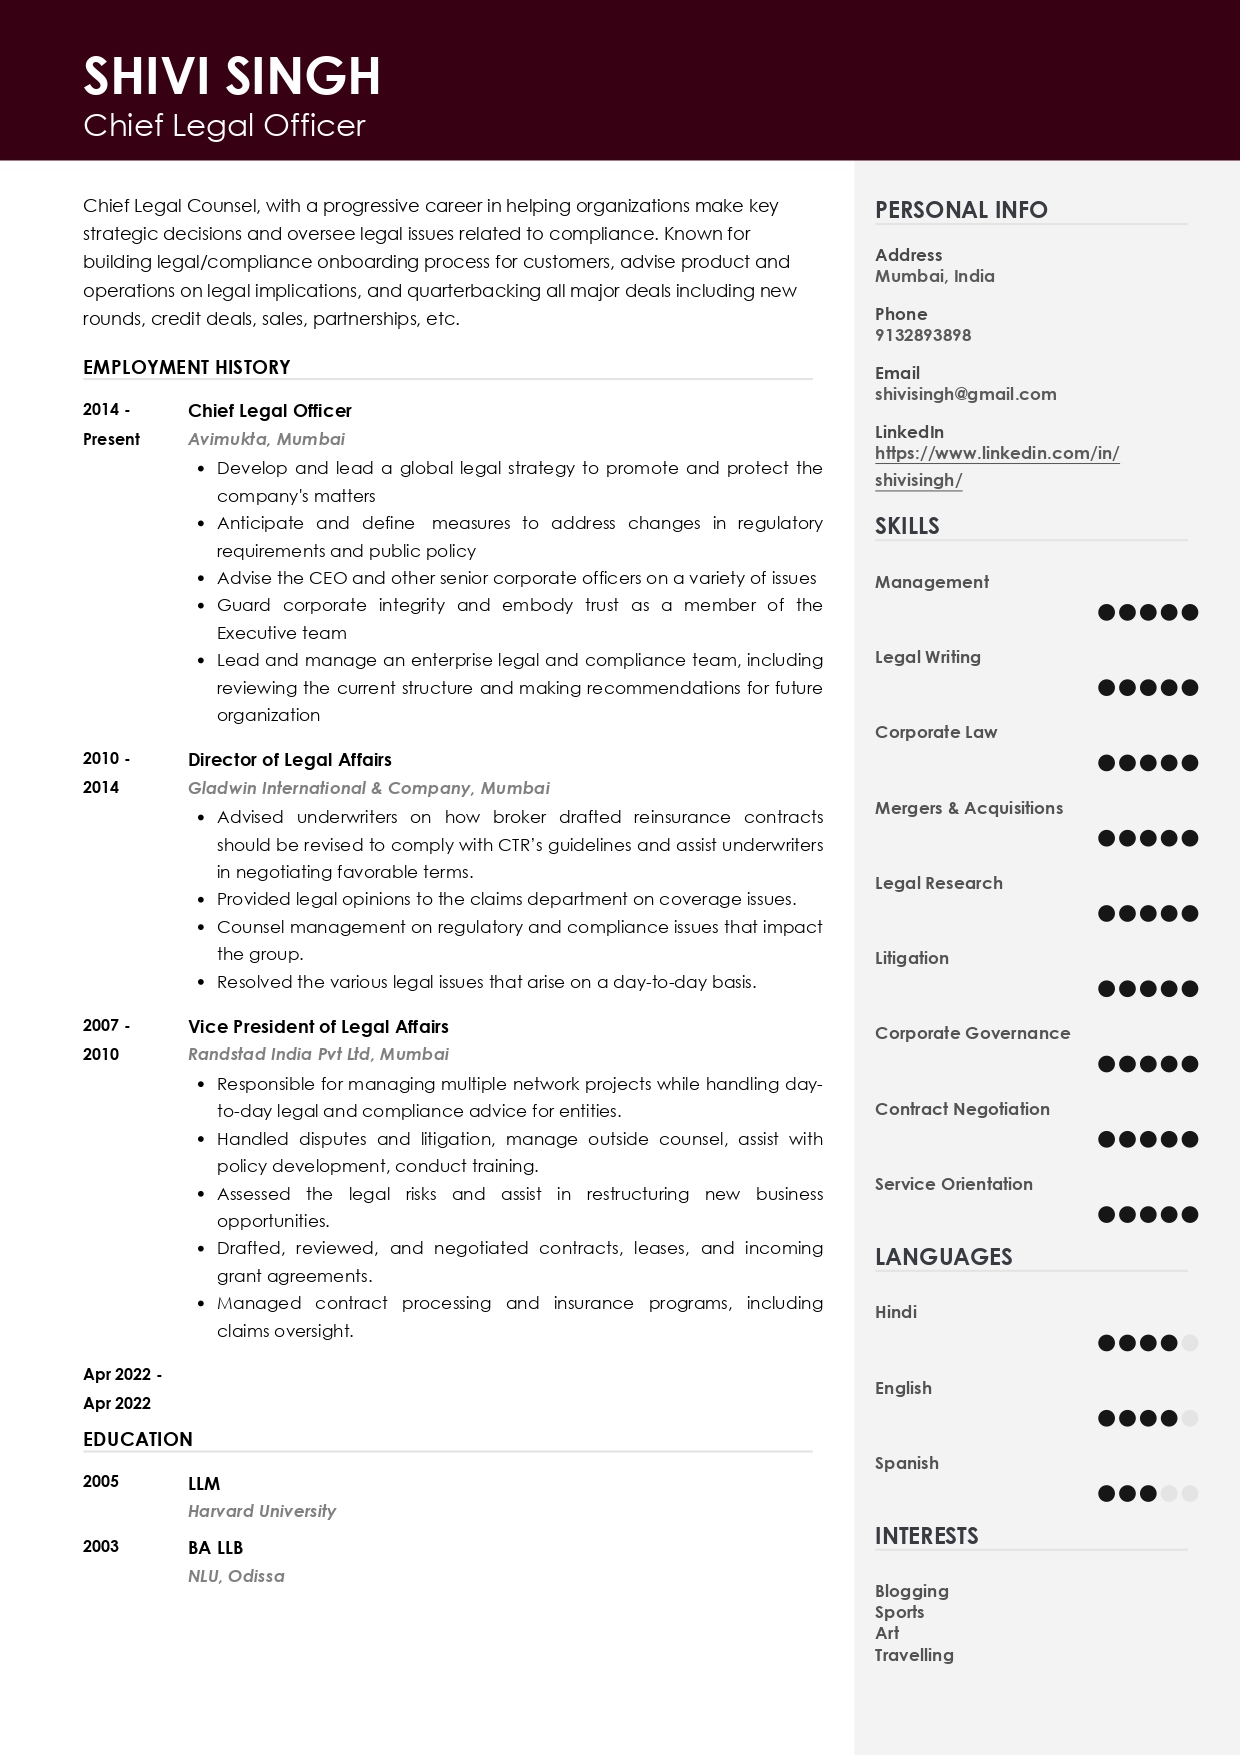 Sample Resume Of Chief Legal Officer | Free Resume Templates & Samples on Resumod.co